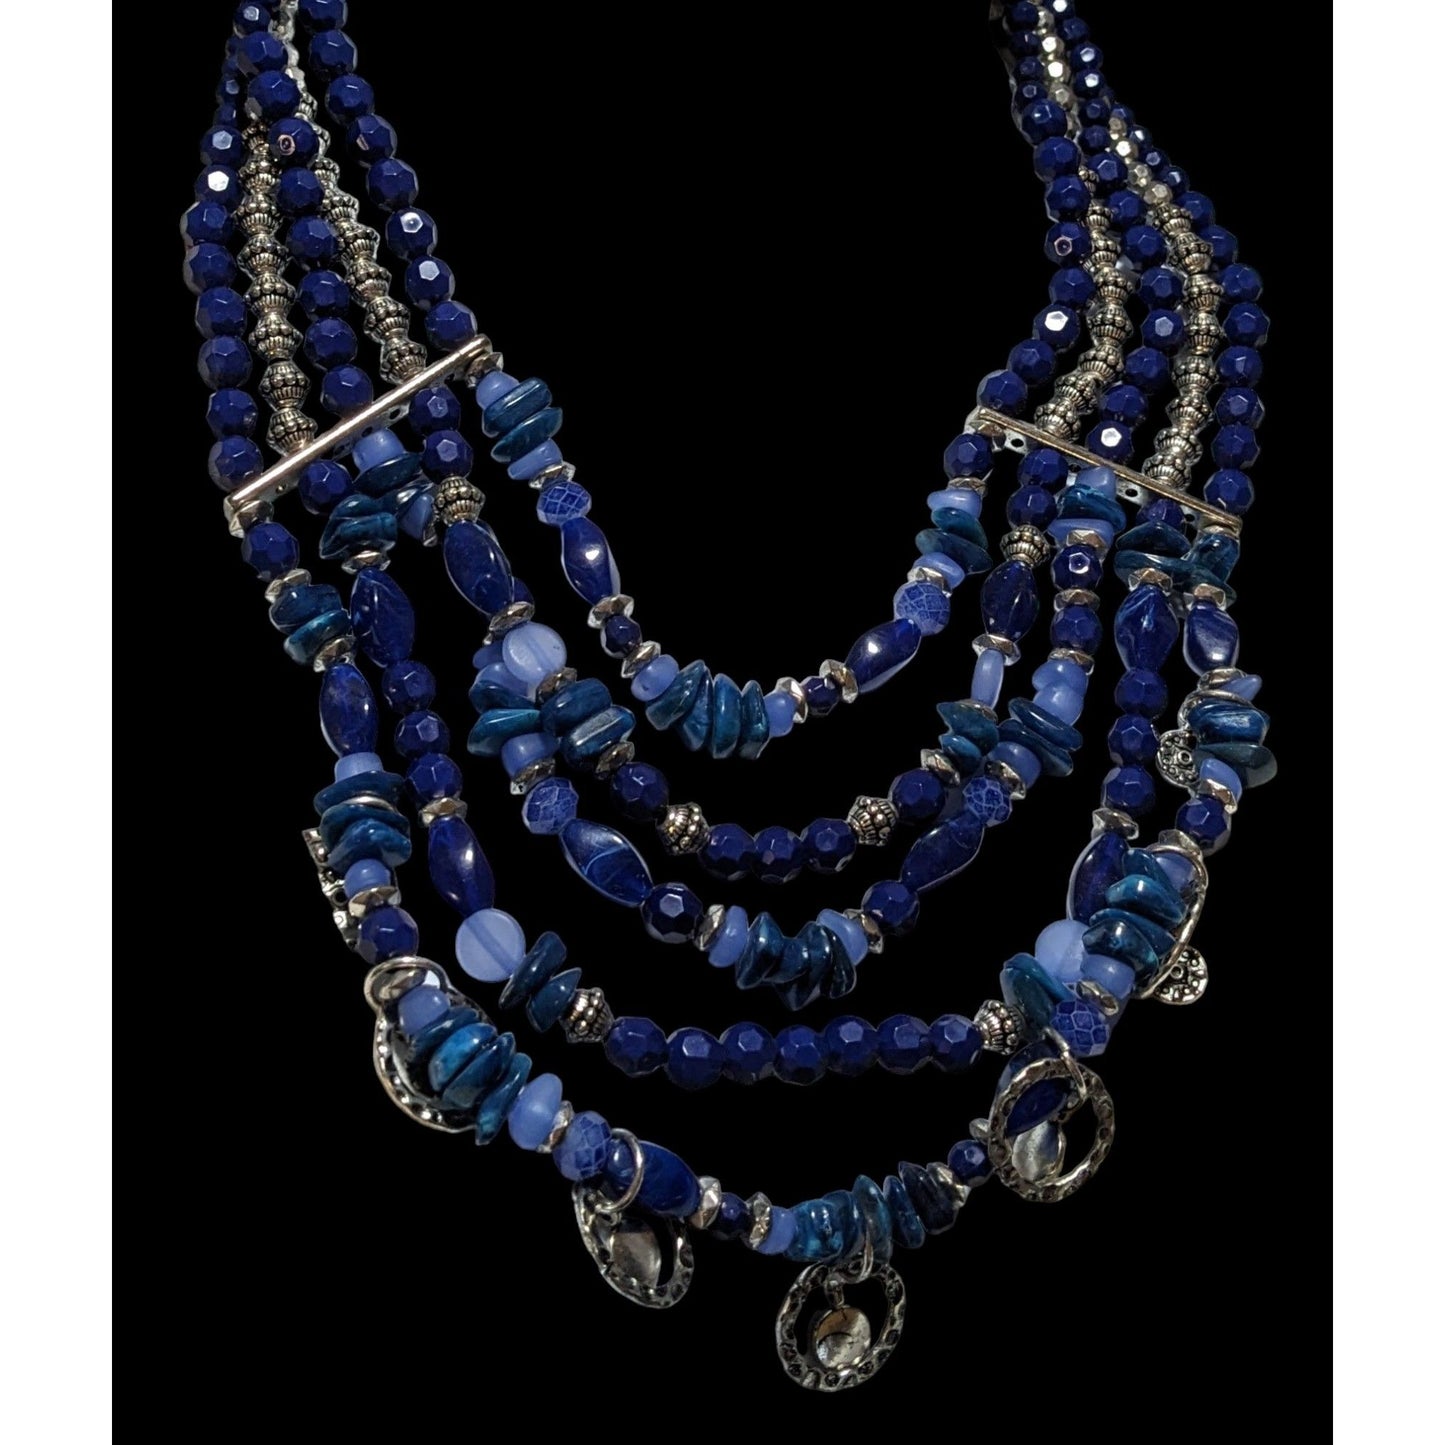 Silver And Blue Bohemian Bib Necklace